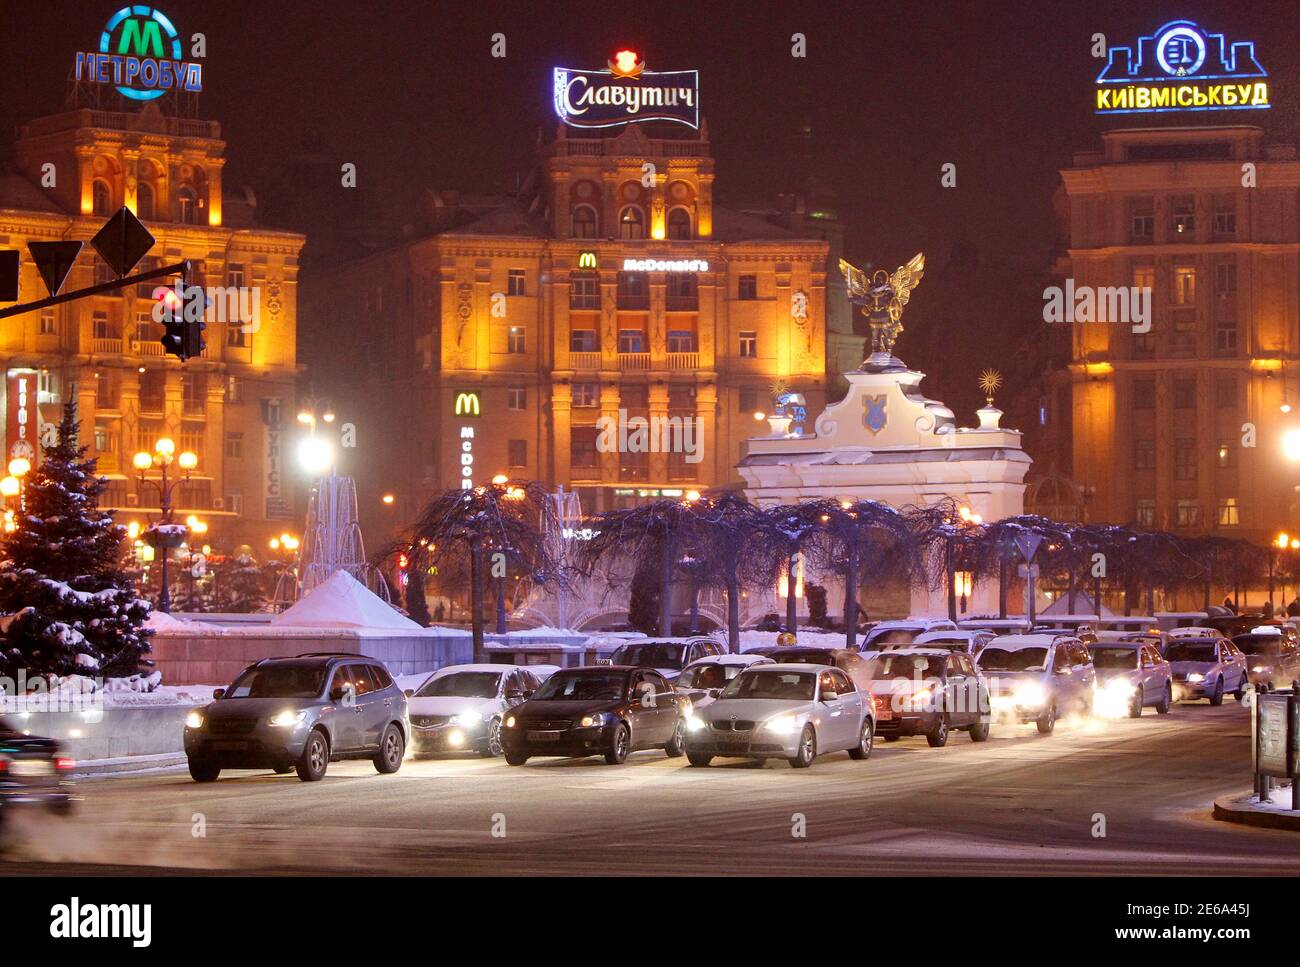 Cars drive around the city centre of Ukrainian capital Kiev with  temperature around minus 18 degree Celsius (minus 0.4 degrees Fahrenheit)  February 3, 2012. 38 more deaths from a cold snap have